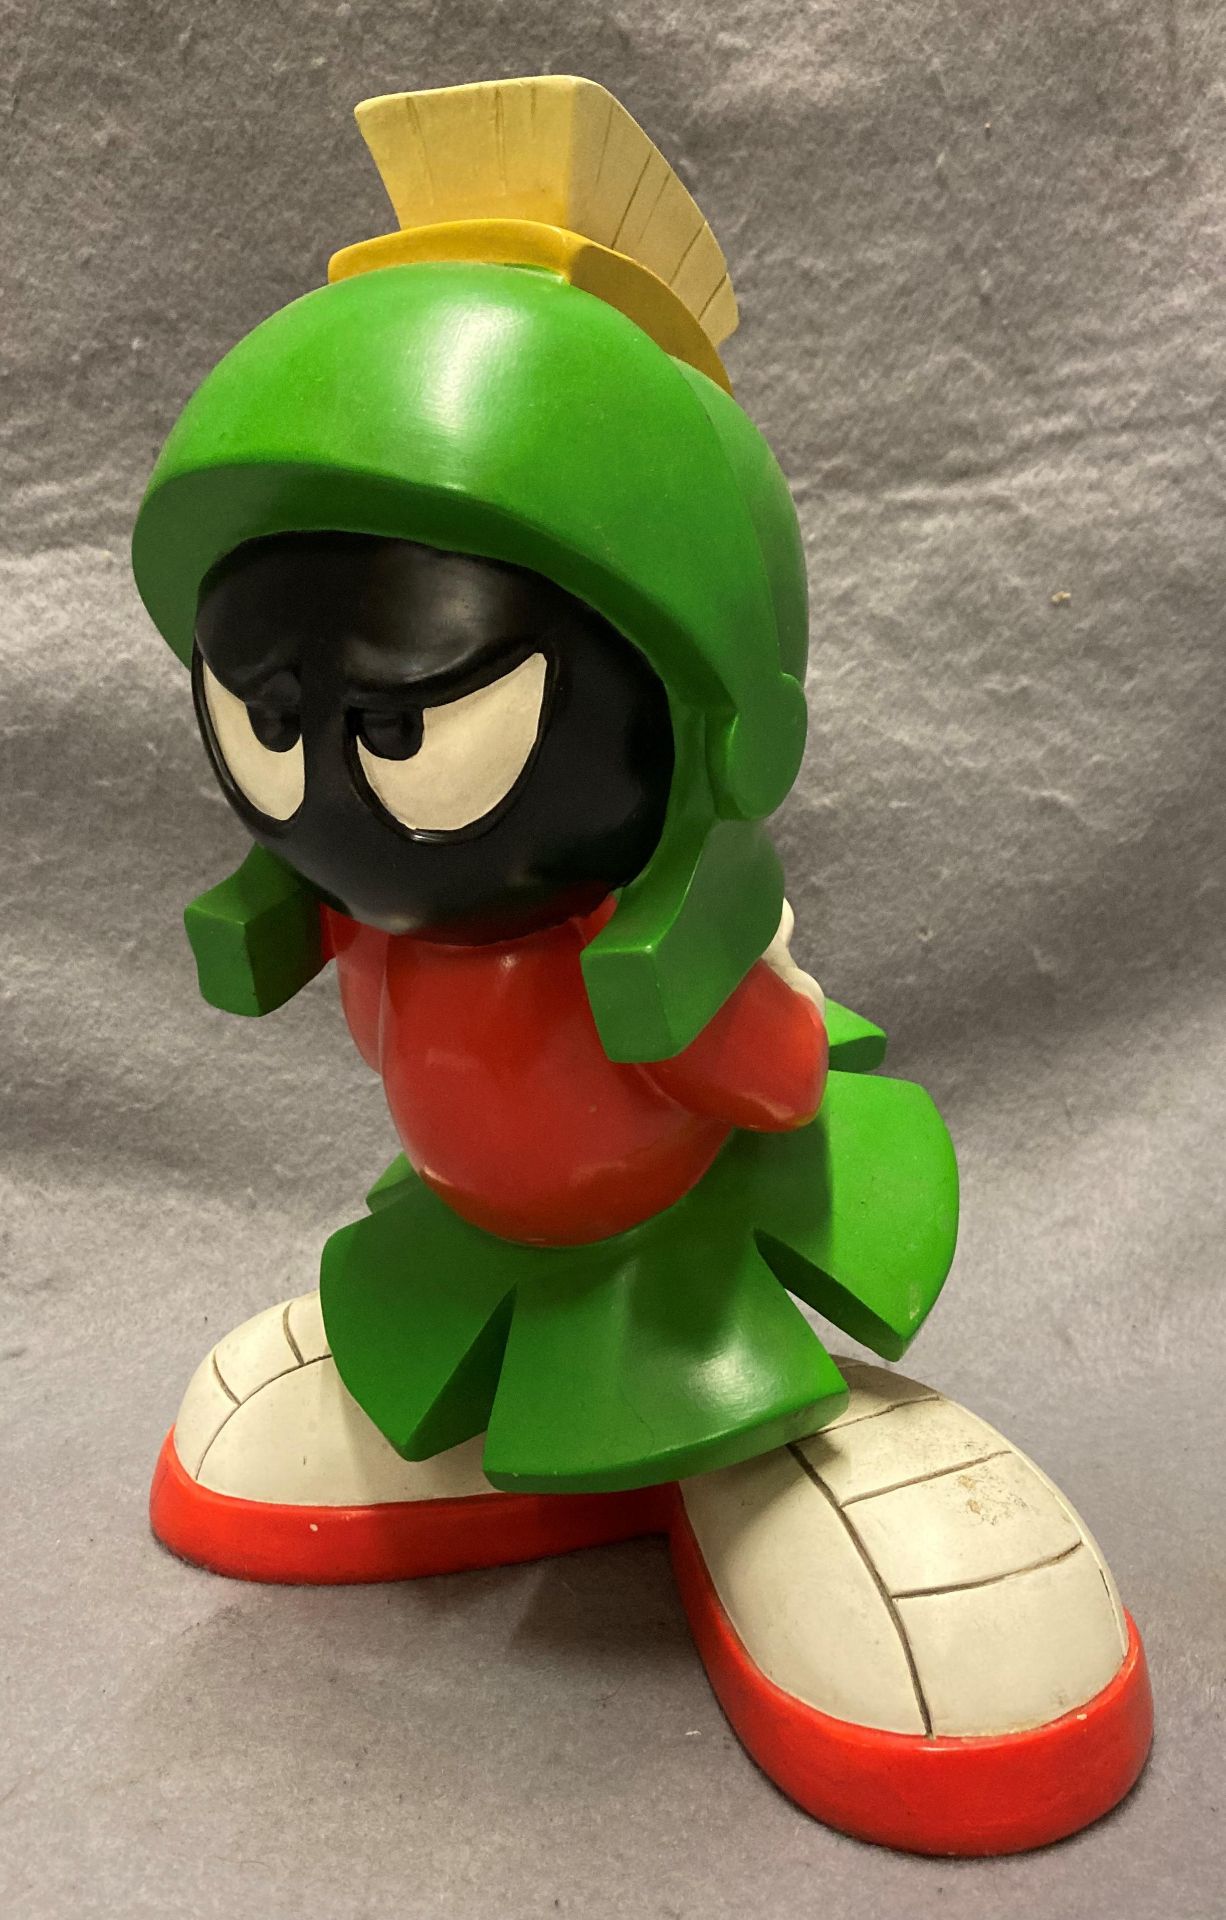 Warner Brothers model of Marvin the Martian, - Image 8 of 8